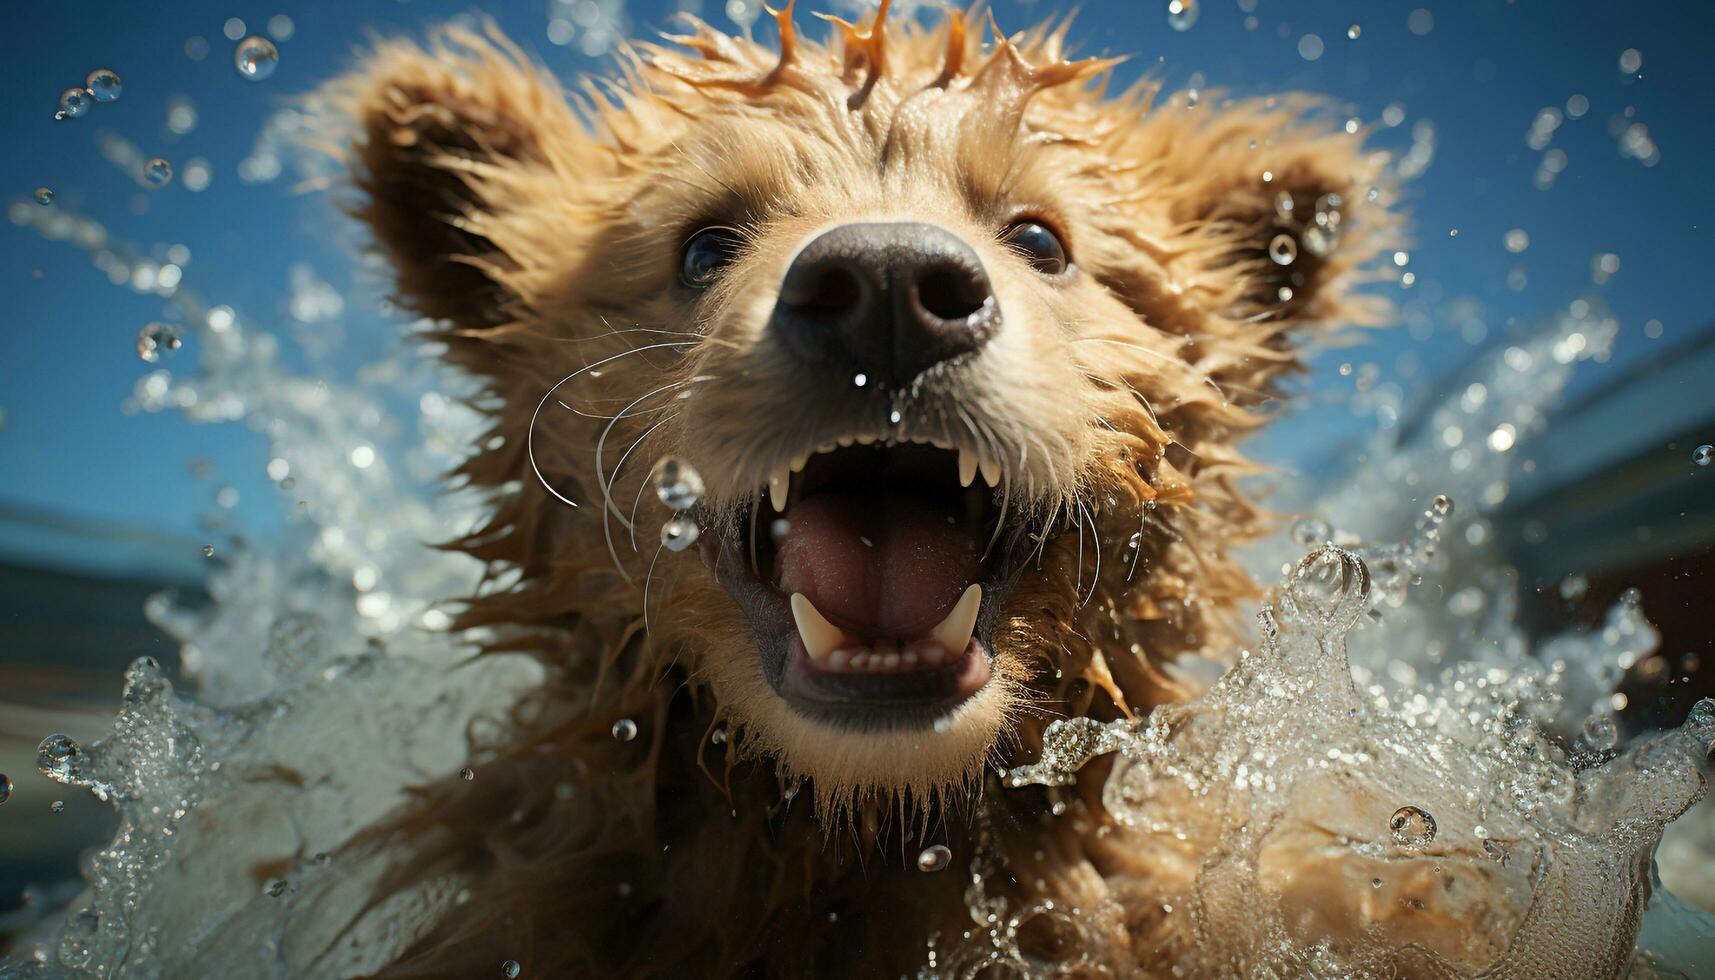 A cute wet dog playing in water, splashing and smiling generated by AI photo